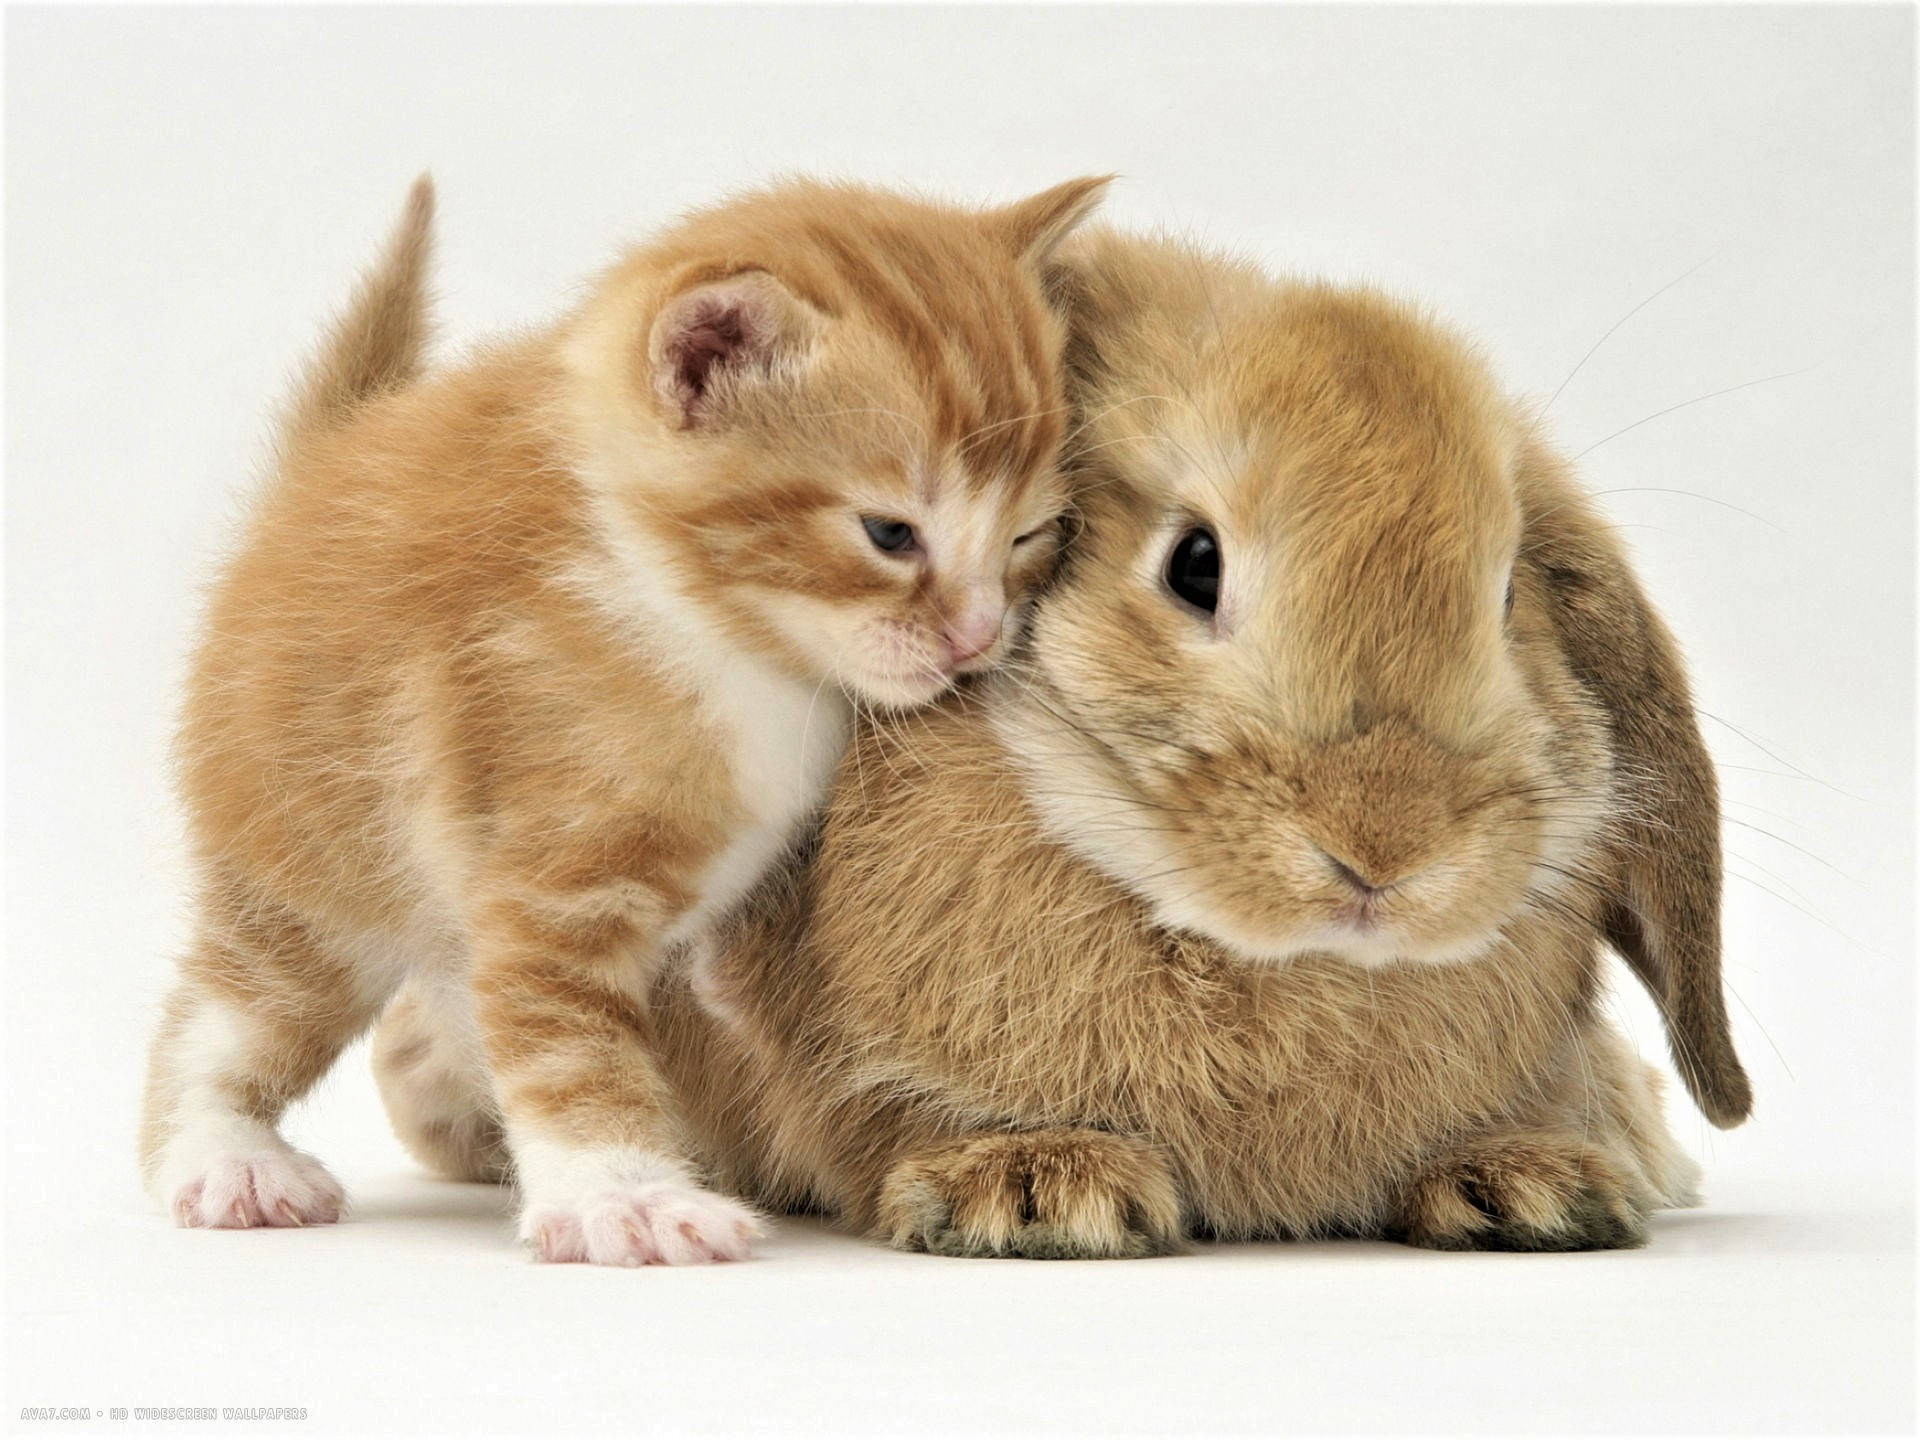 Cute Kitten With Adorable Bunny